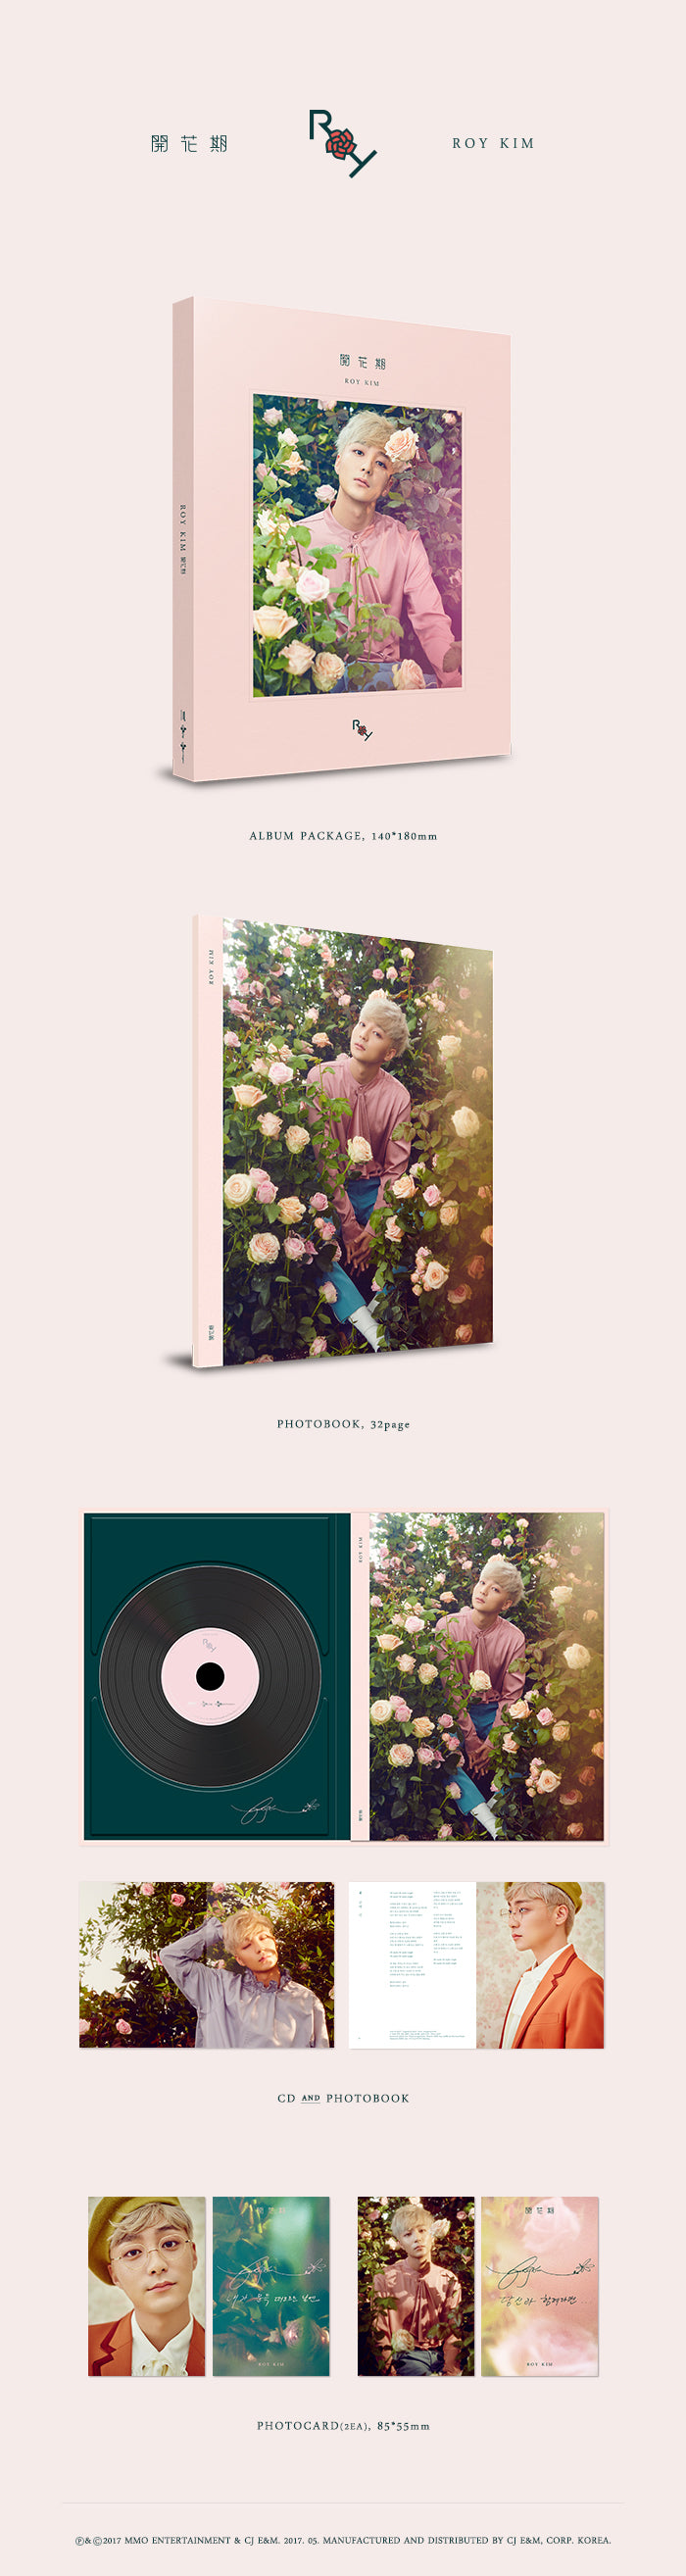 - 25th spring. Enlightenment and Roy Kim - Roy Kim, the twenty-fifth spring that blooms splendidly, In the beginning of hi...